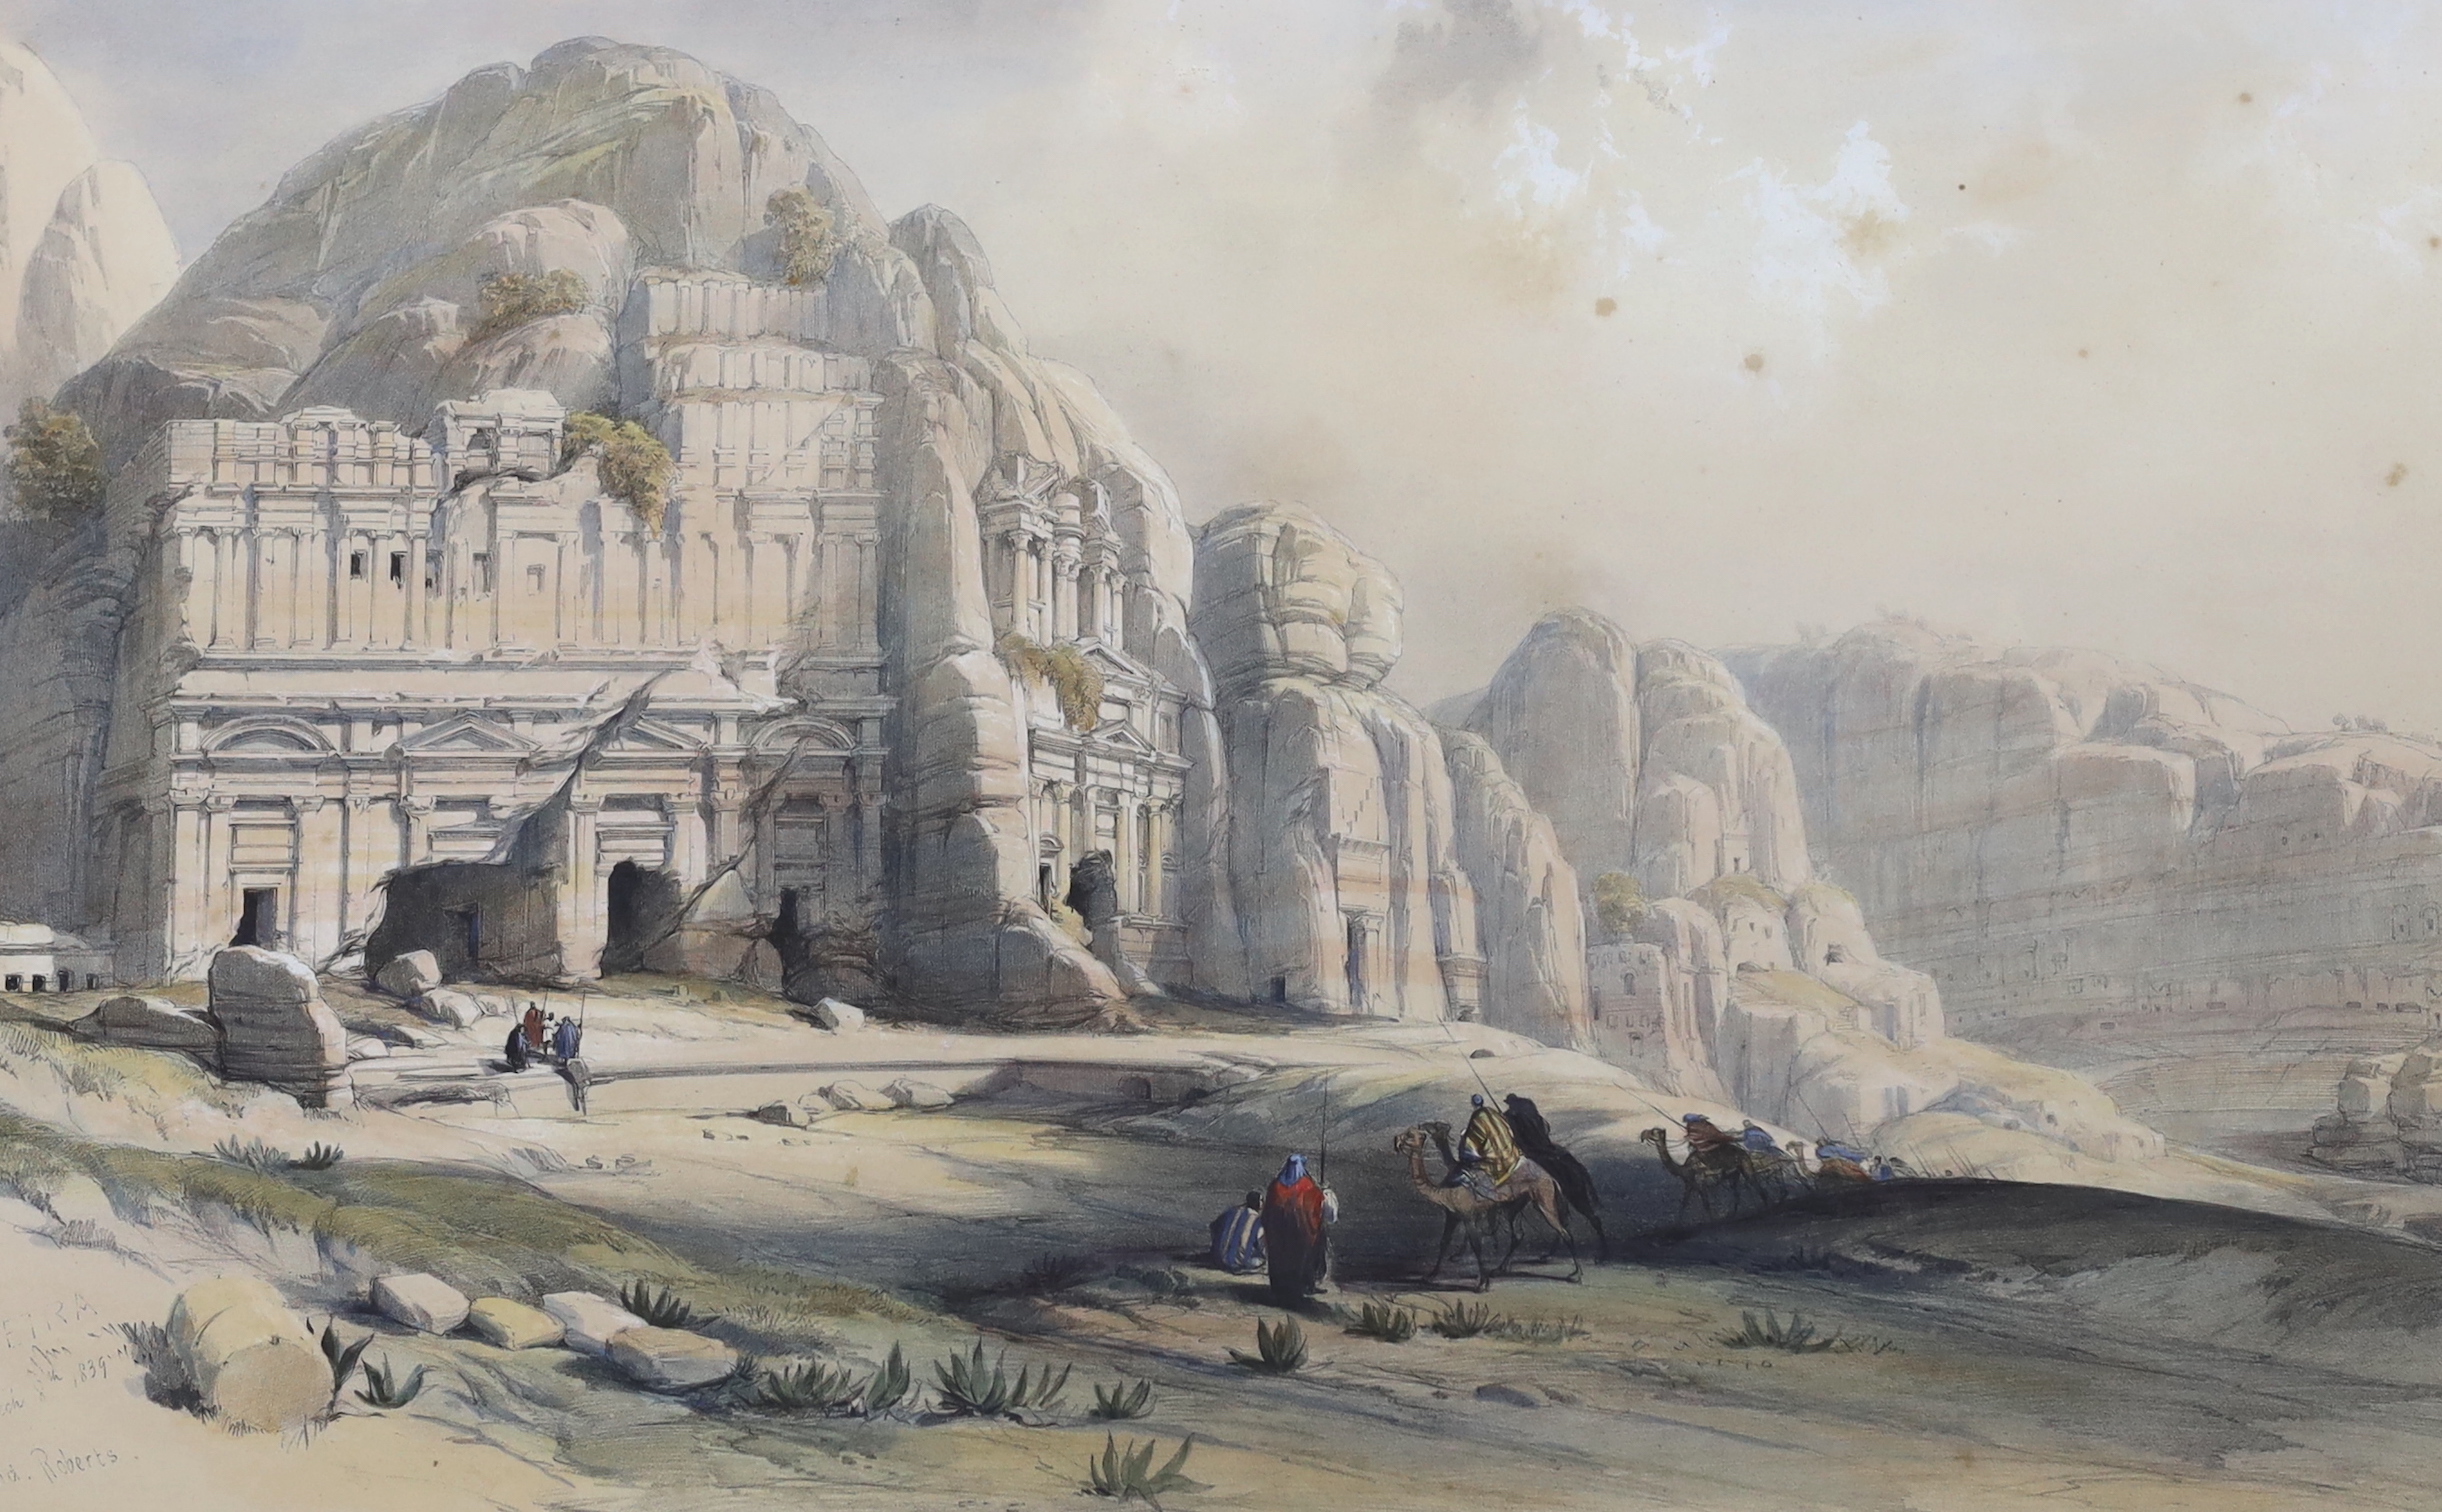 David Roberts (Scottish, 1796-1864), colour lithograph, 'Petra, Eastern End of the Valley’ publ. F.G. Moon, July 1st 1842, 36 x 53cm